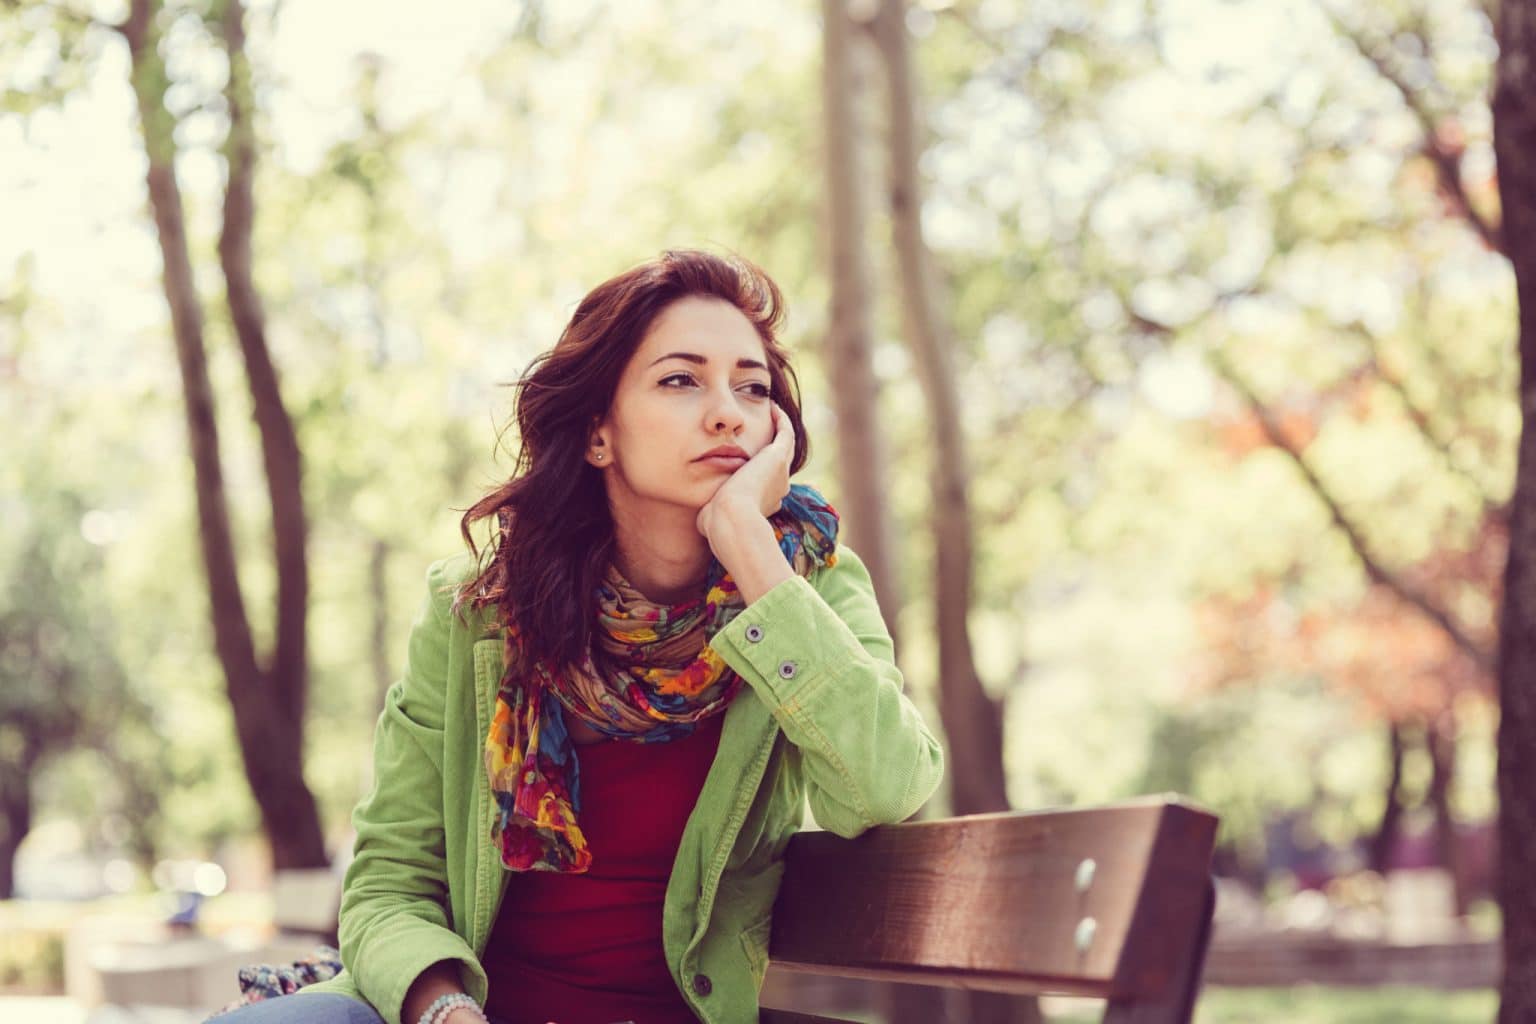 Woman sitting on a park bench with an uninterested expression.